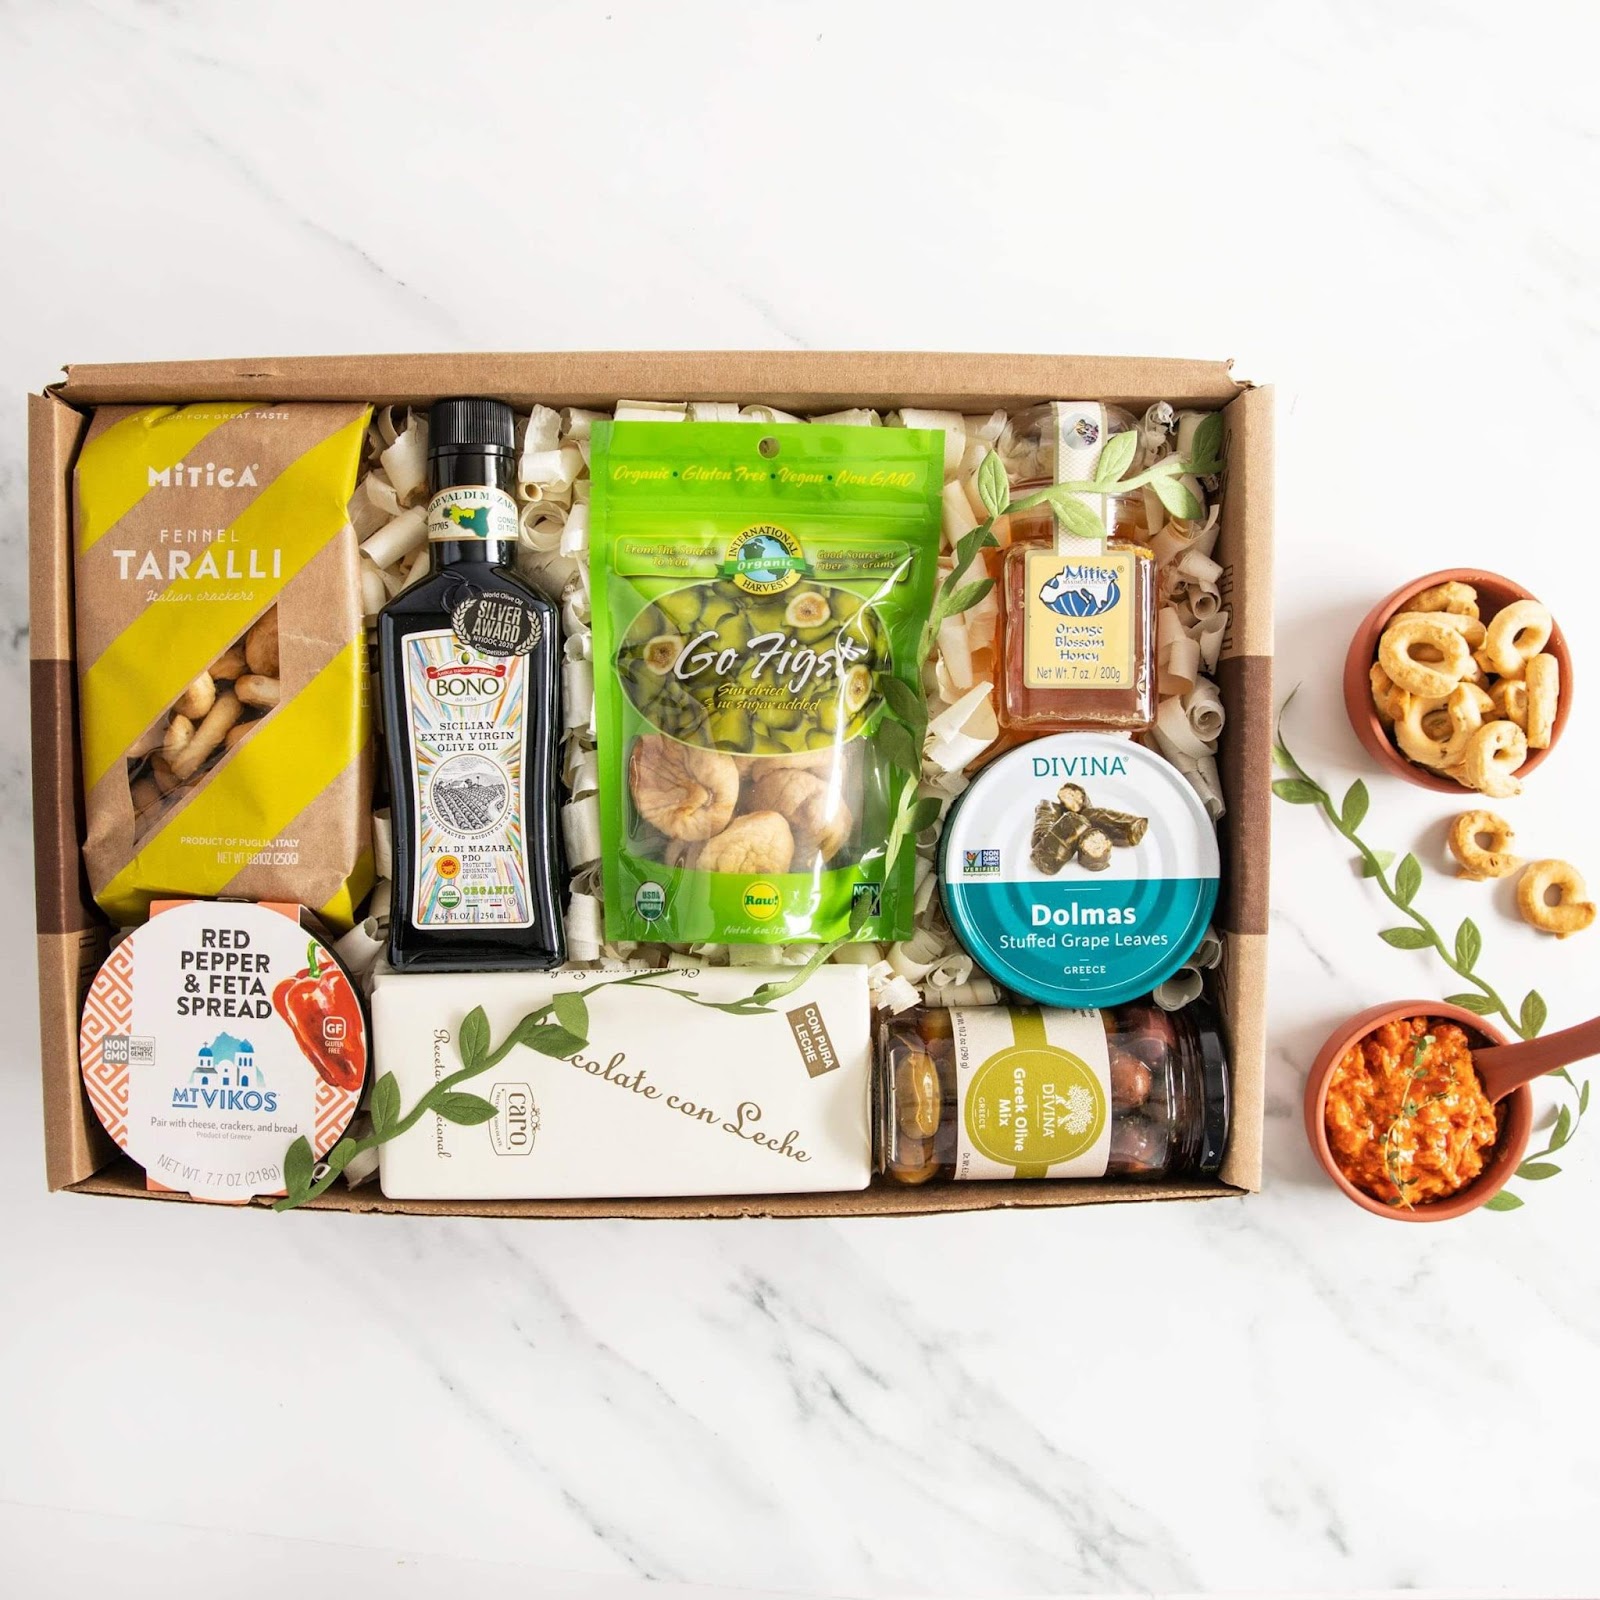 Gourmet Food and Drink Basket - Great Birthday Gift Ideas for Him